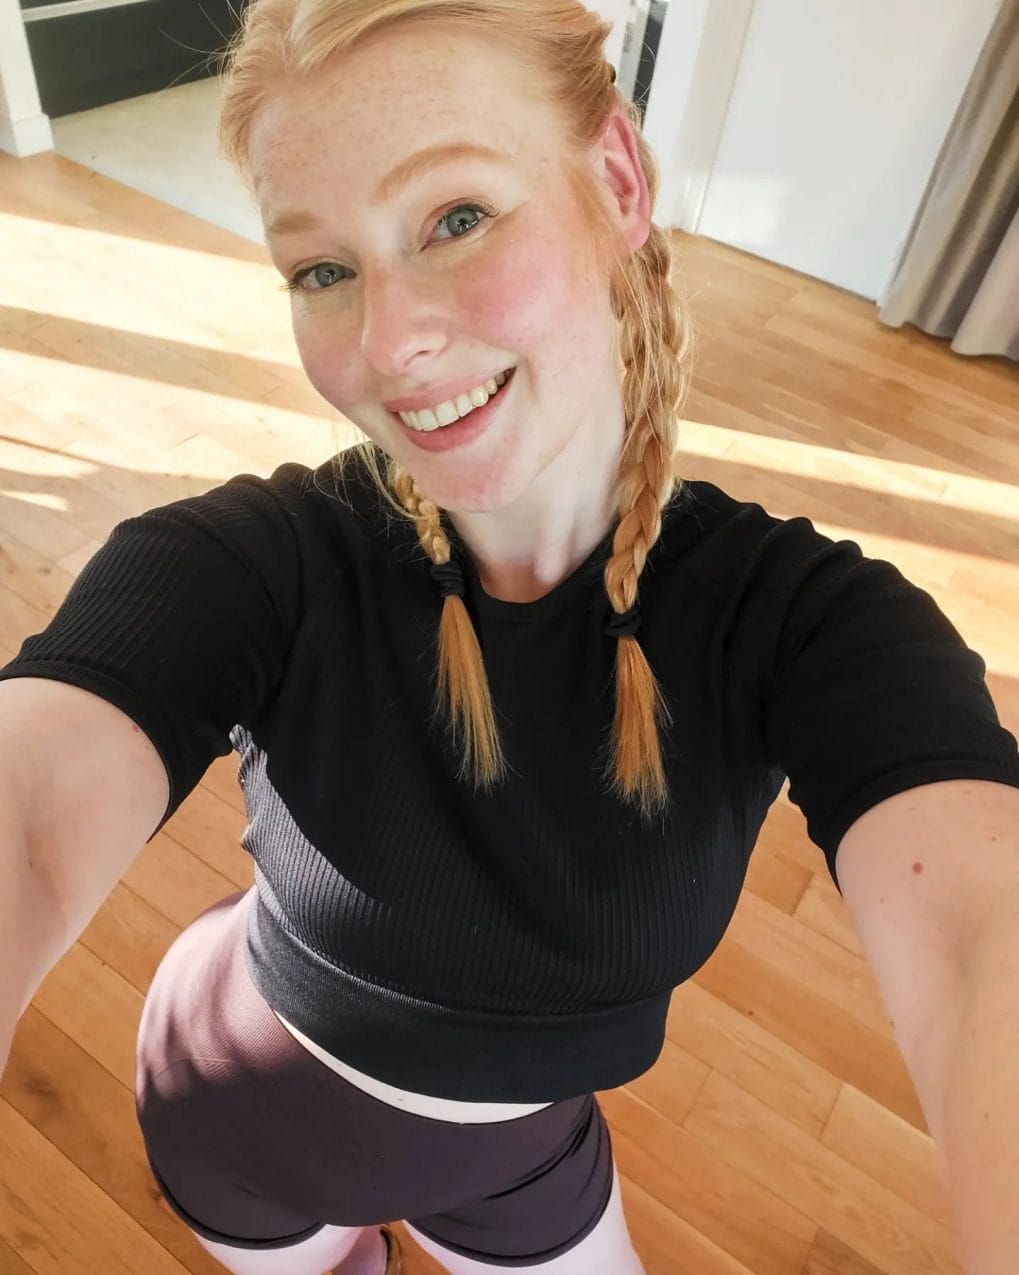 Blonde pigtail braids starting high, youthful and neatly secured for the gym